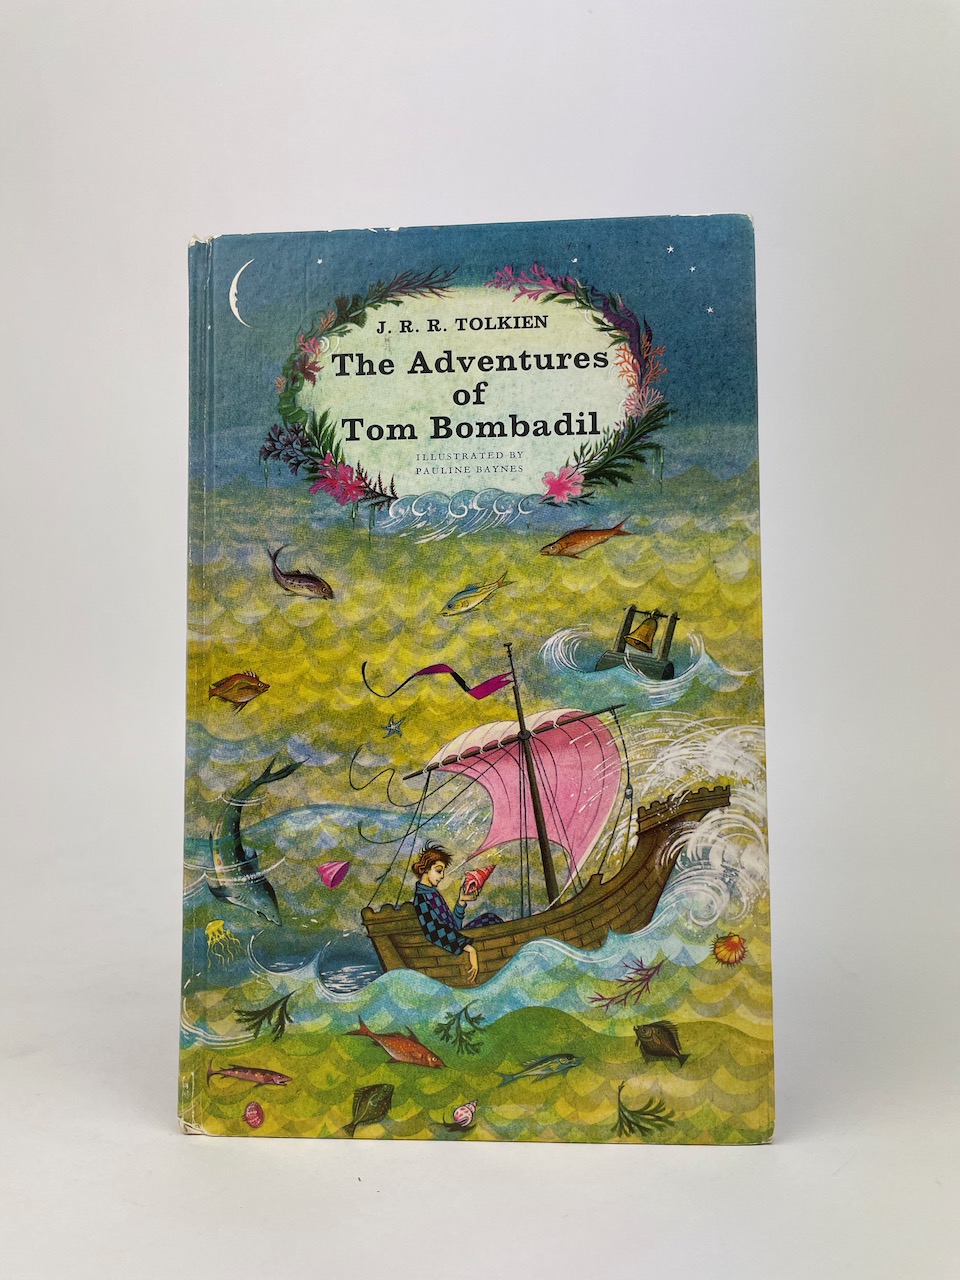 The Adventures of Tom Bombadil by J.R.R. Tolkien, illustrated by Pauline Baynes 5